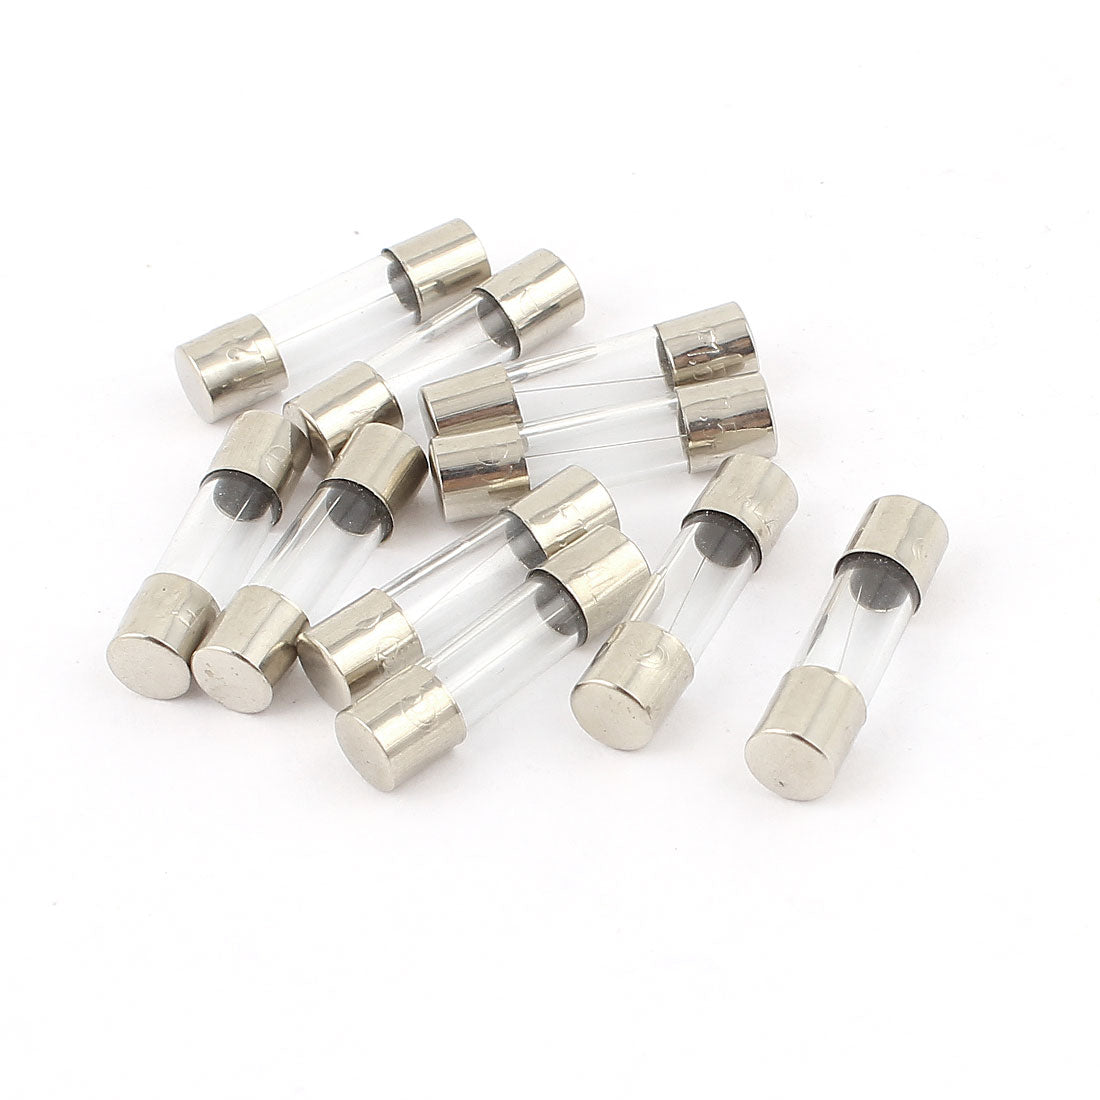 uxcell Uxcell 10Pcs 250V 1.5A Quick Fast Blow Glass Fuses Tube 5mm x 20mm